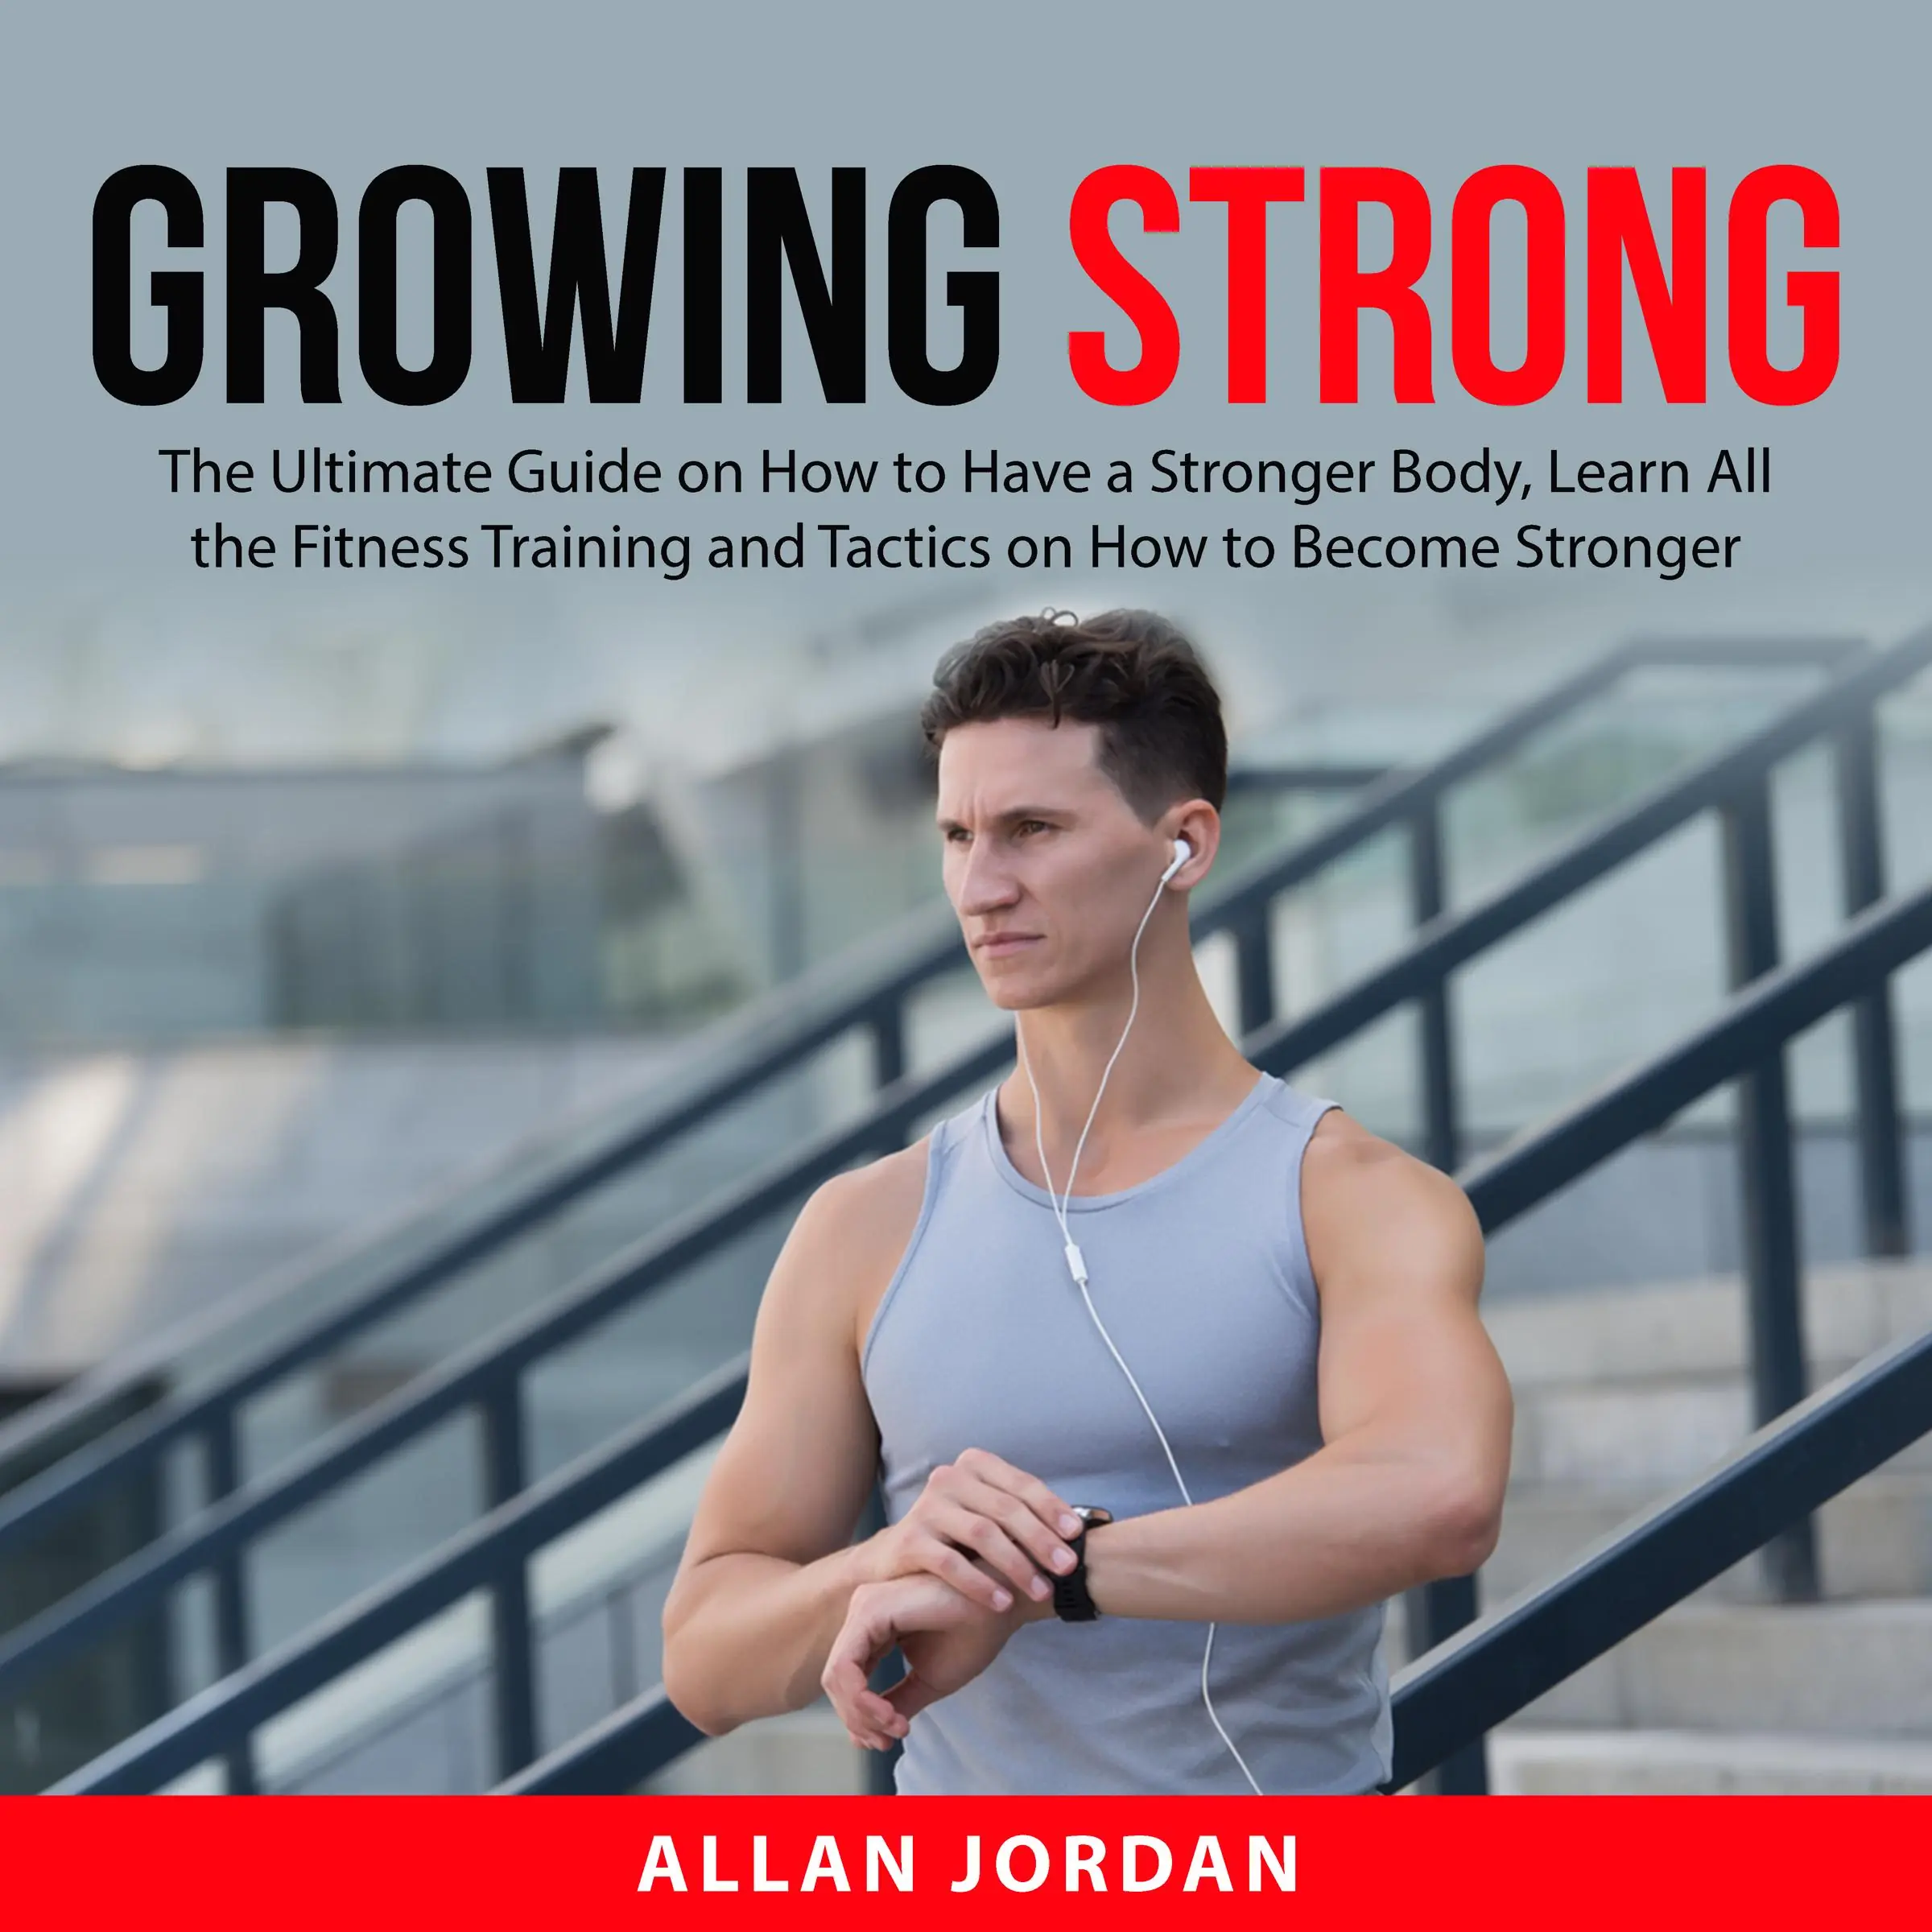 Growing Strong: The Ultimate Guide on How to Have a Stronger Body, Learn All the Fitness Training and Tactics on How to Become Stronger by Allan Jordan Audiobook